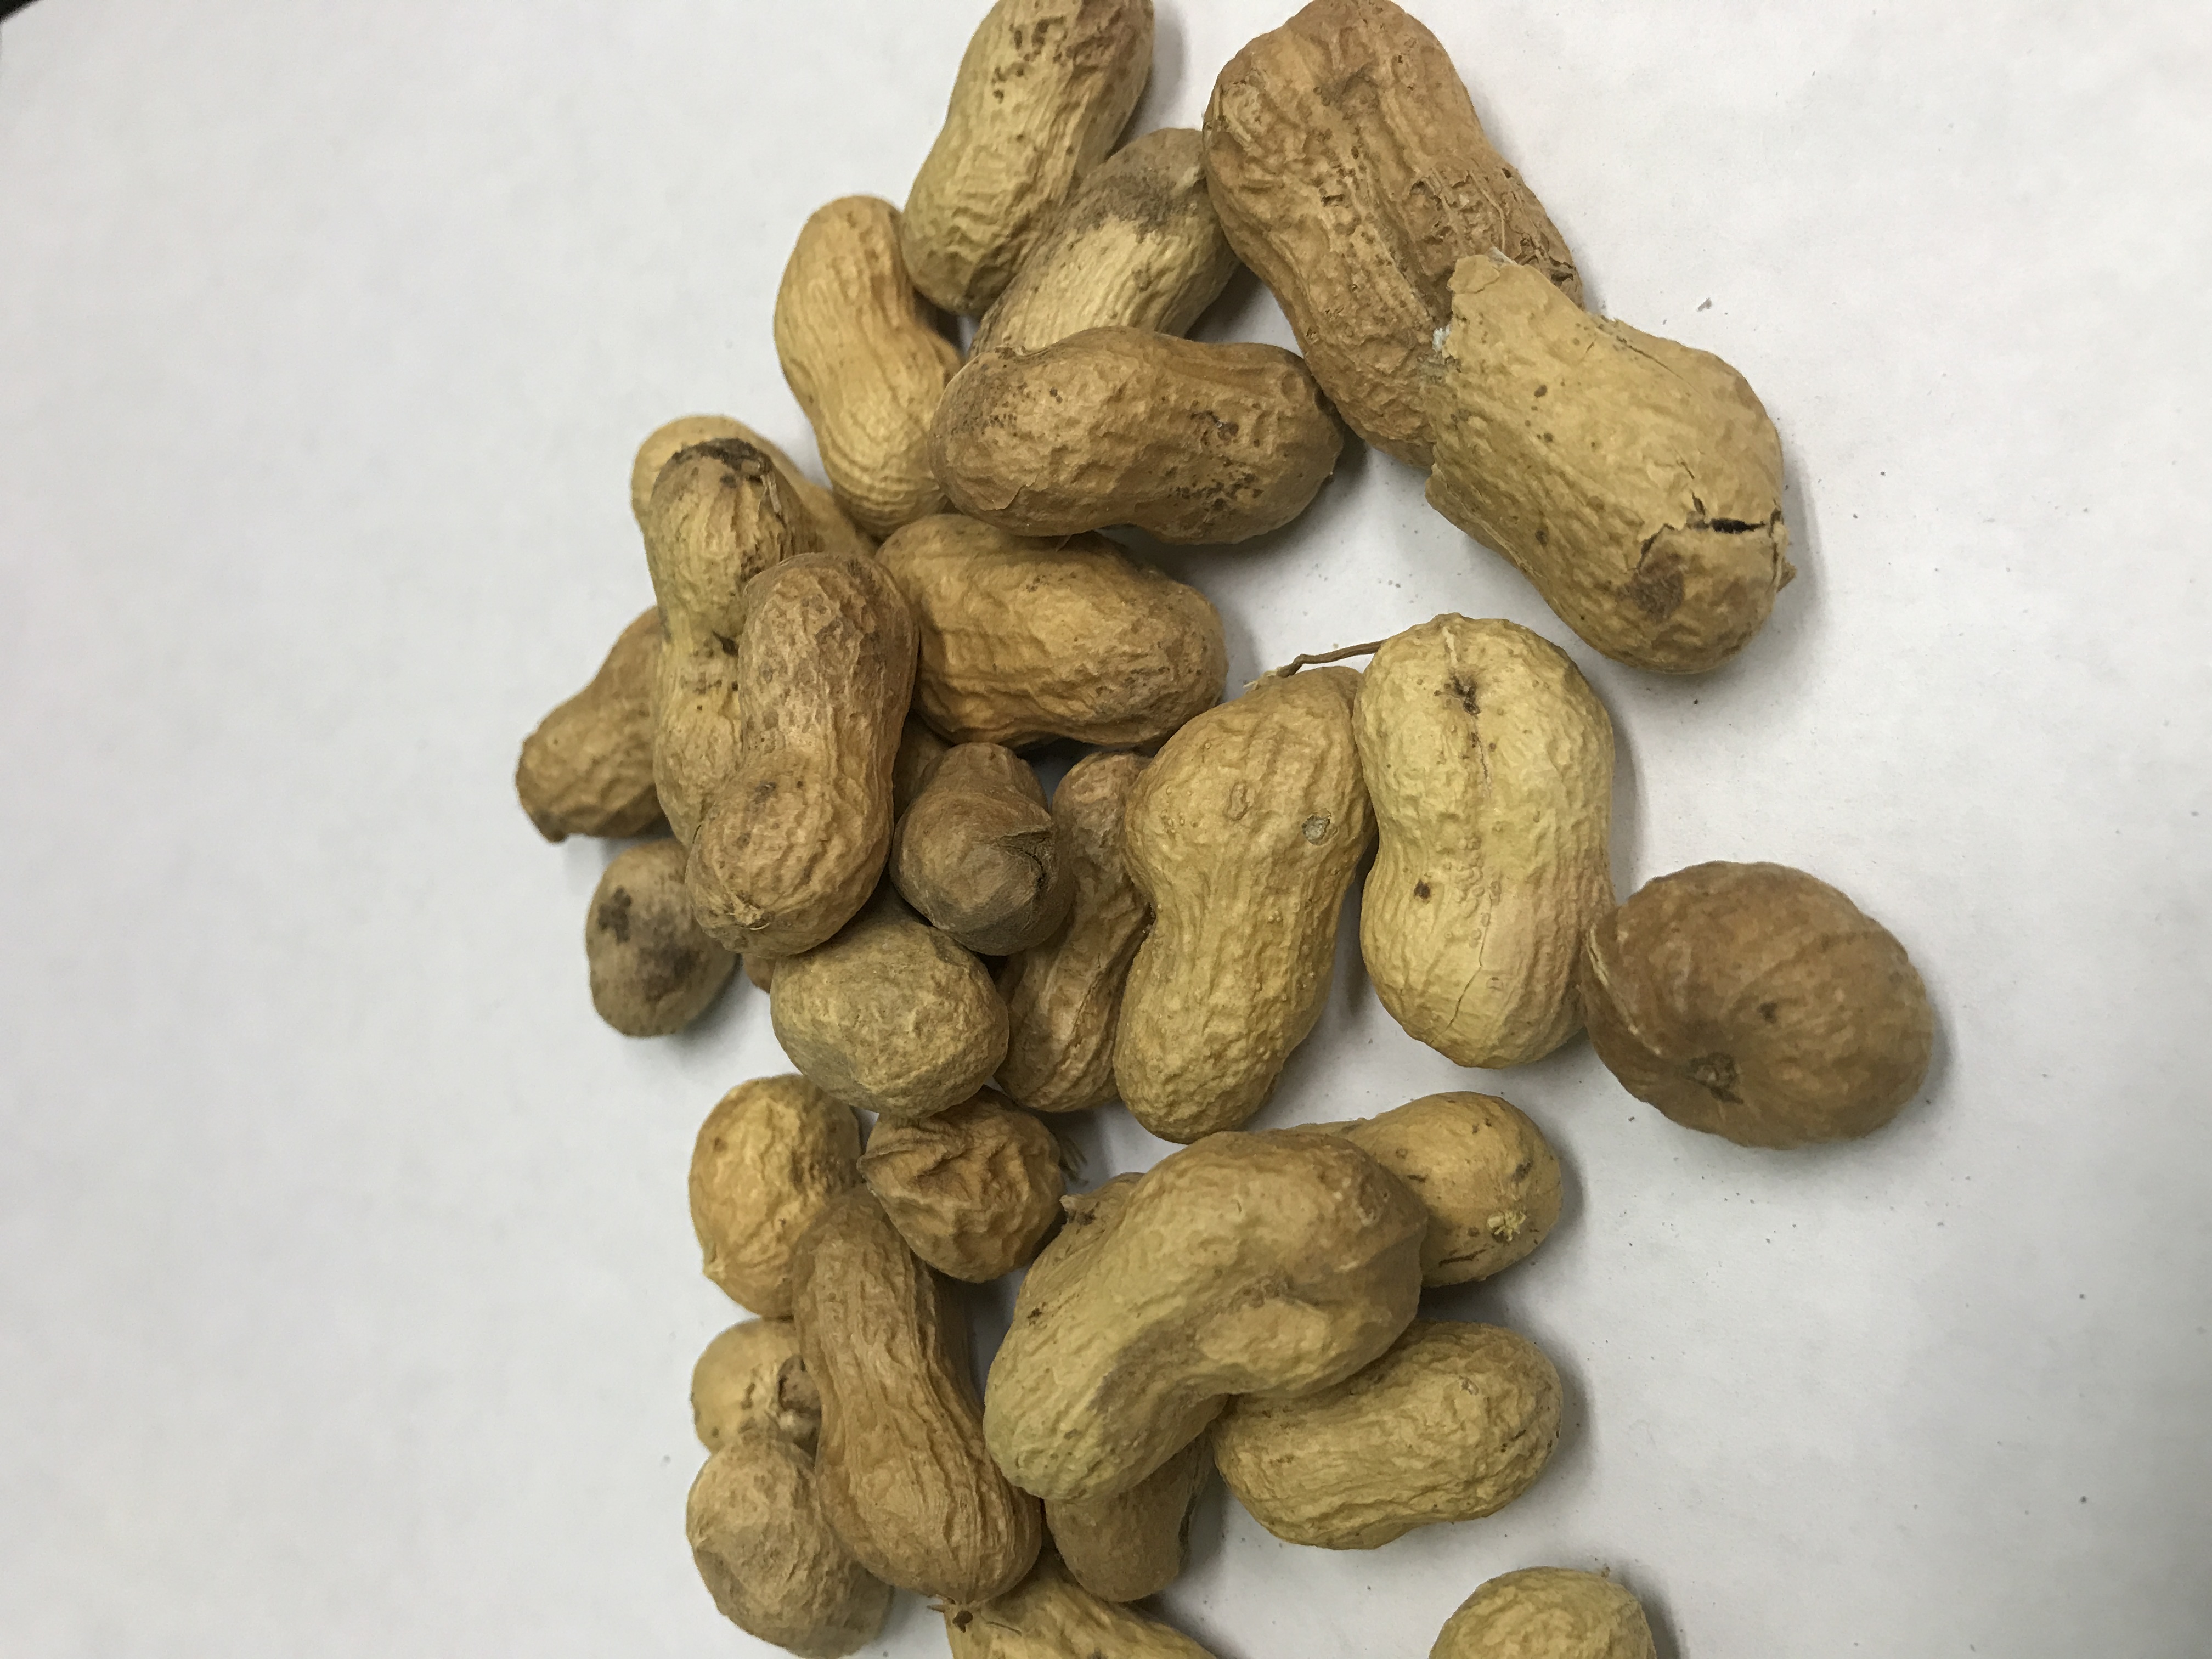 Peanuts In the Shell